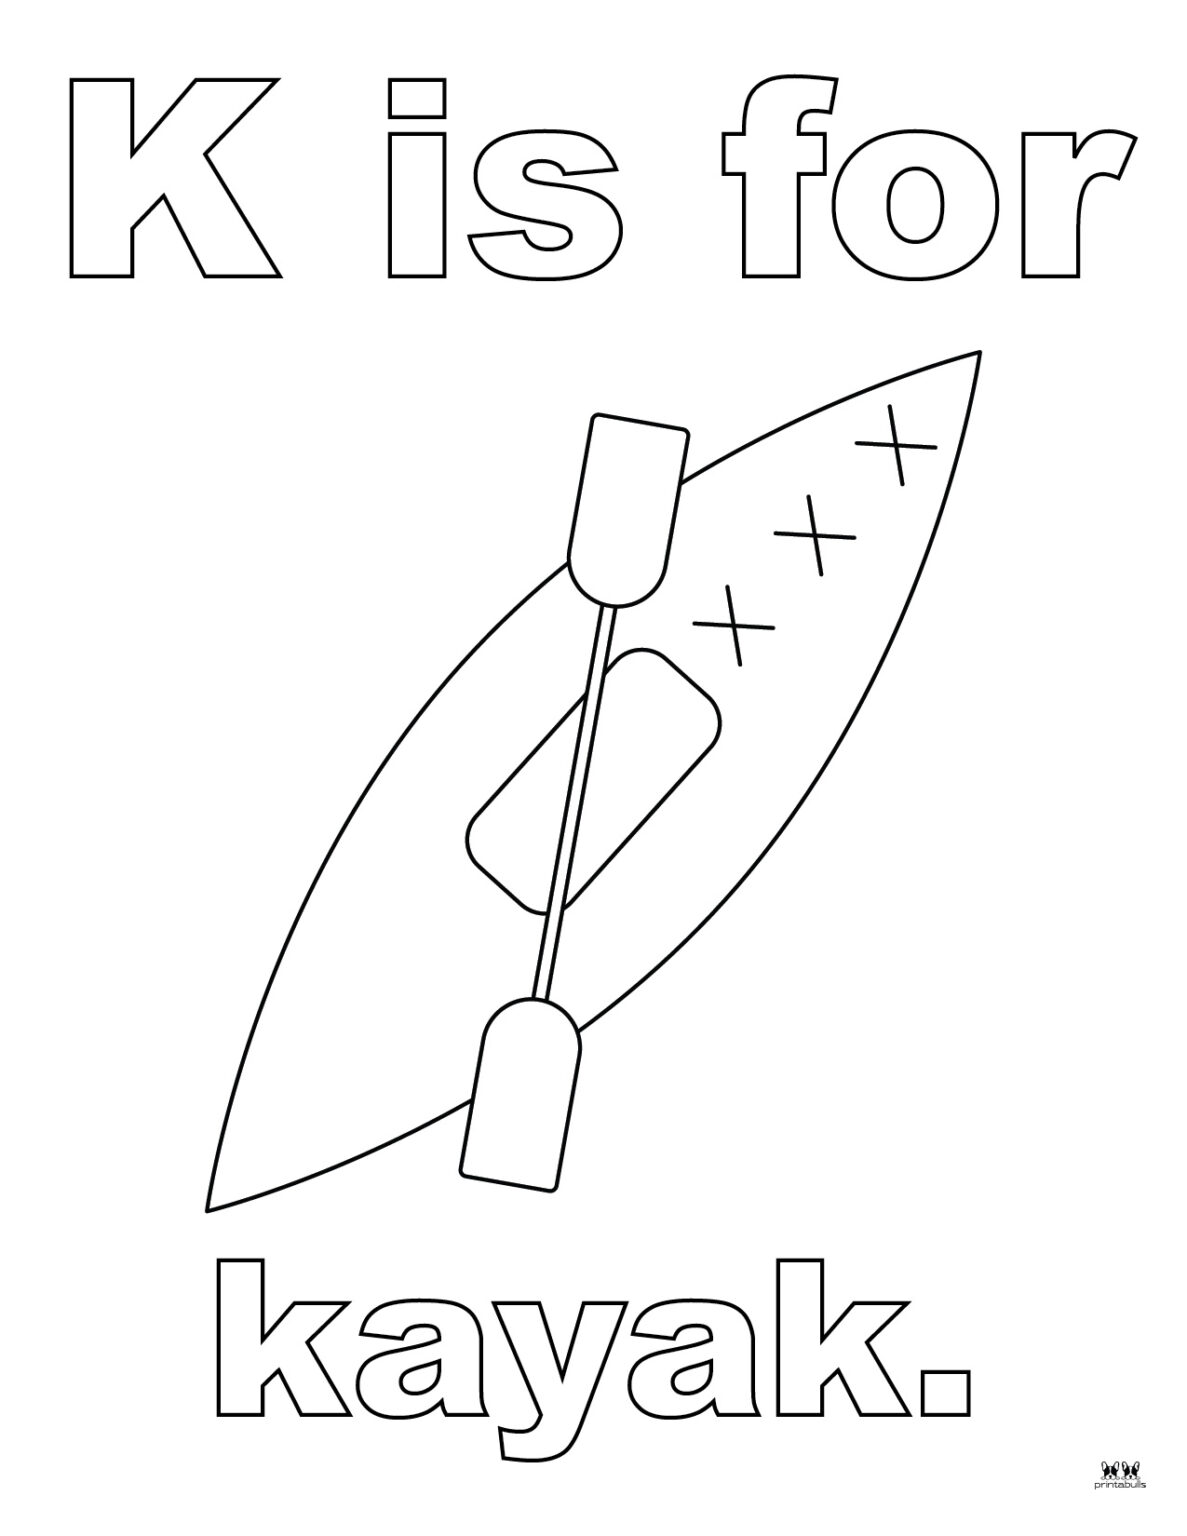 letter-k-coloring-pages-15-free-pages-printabulls